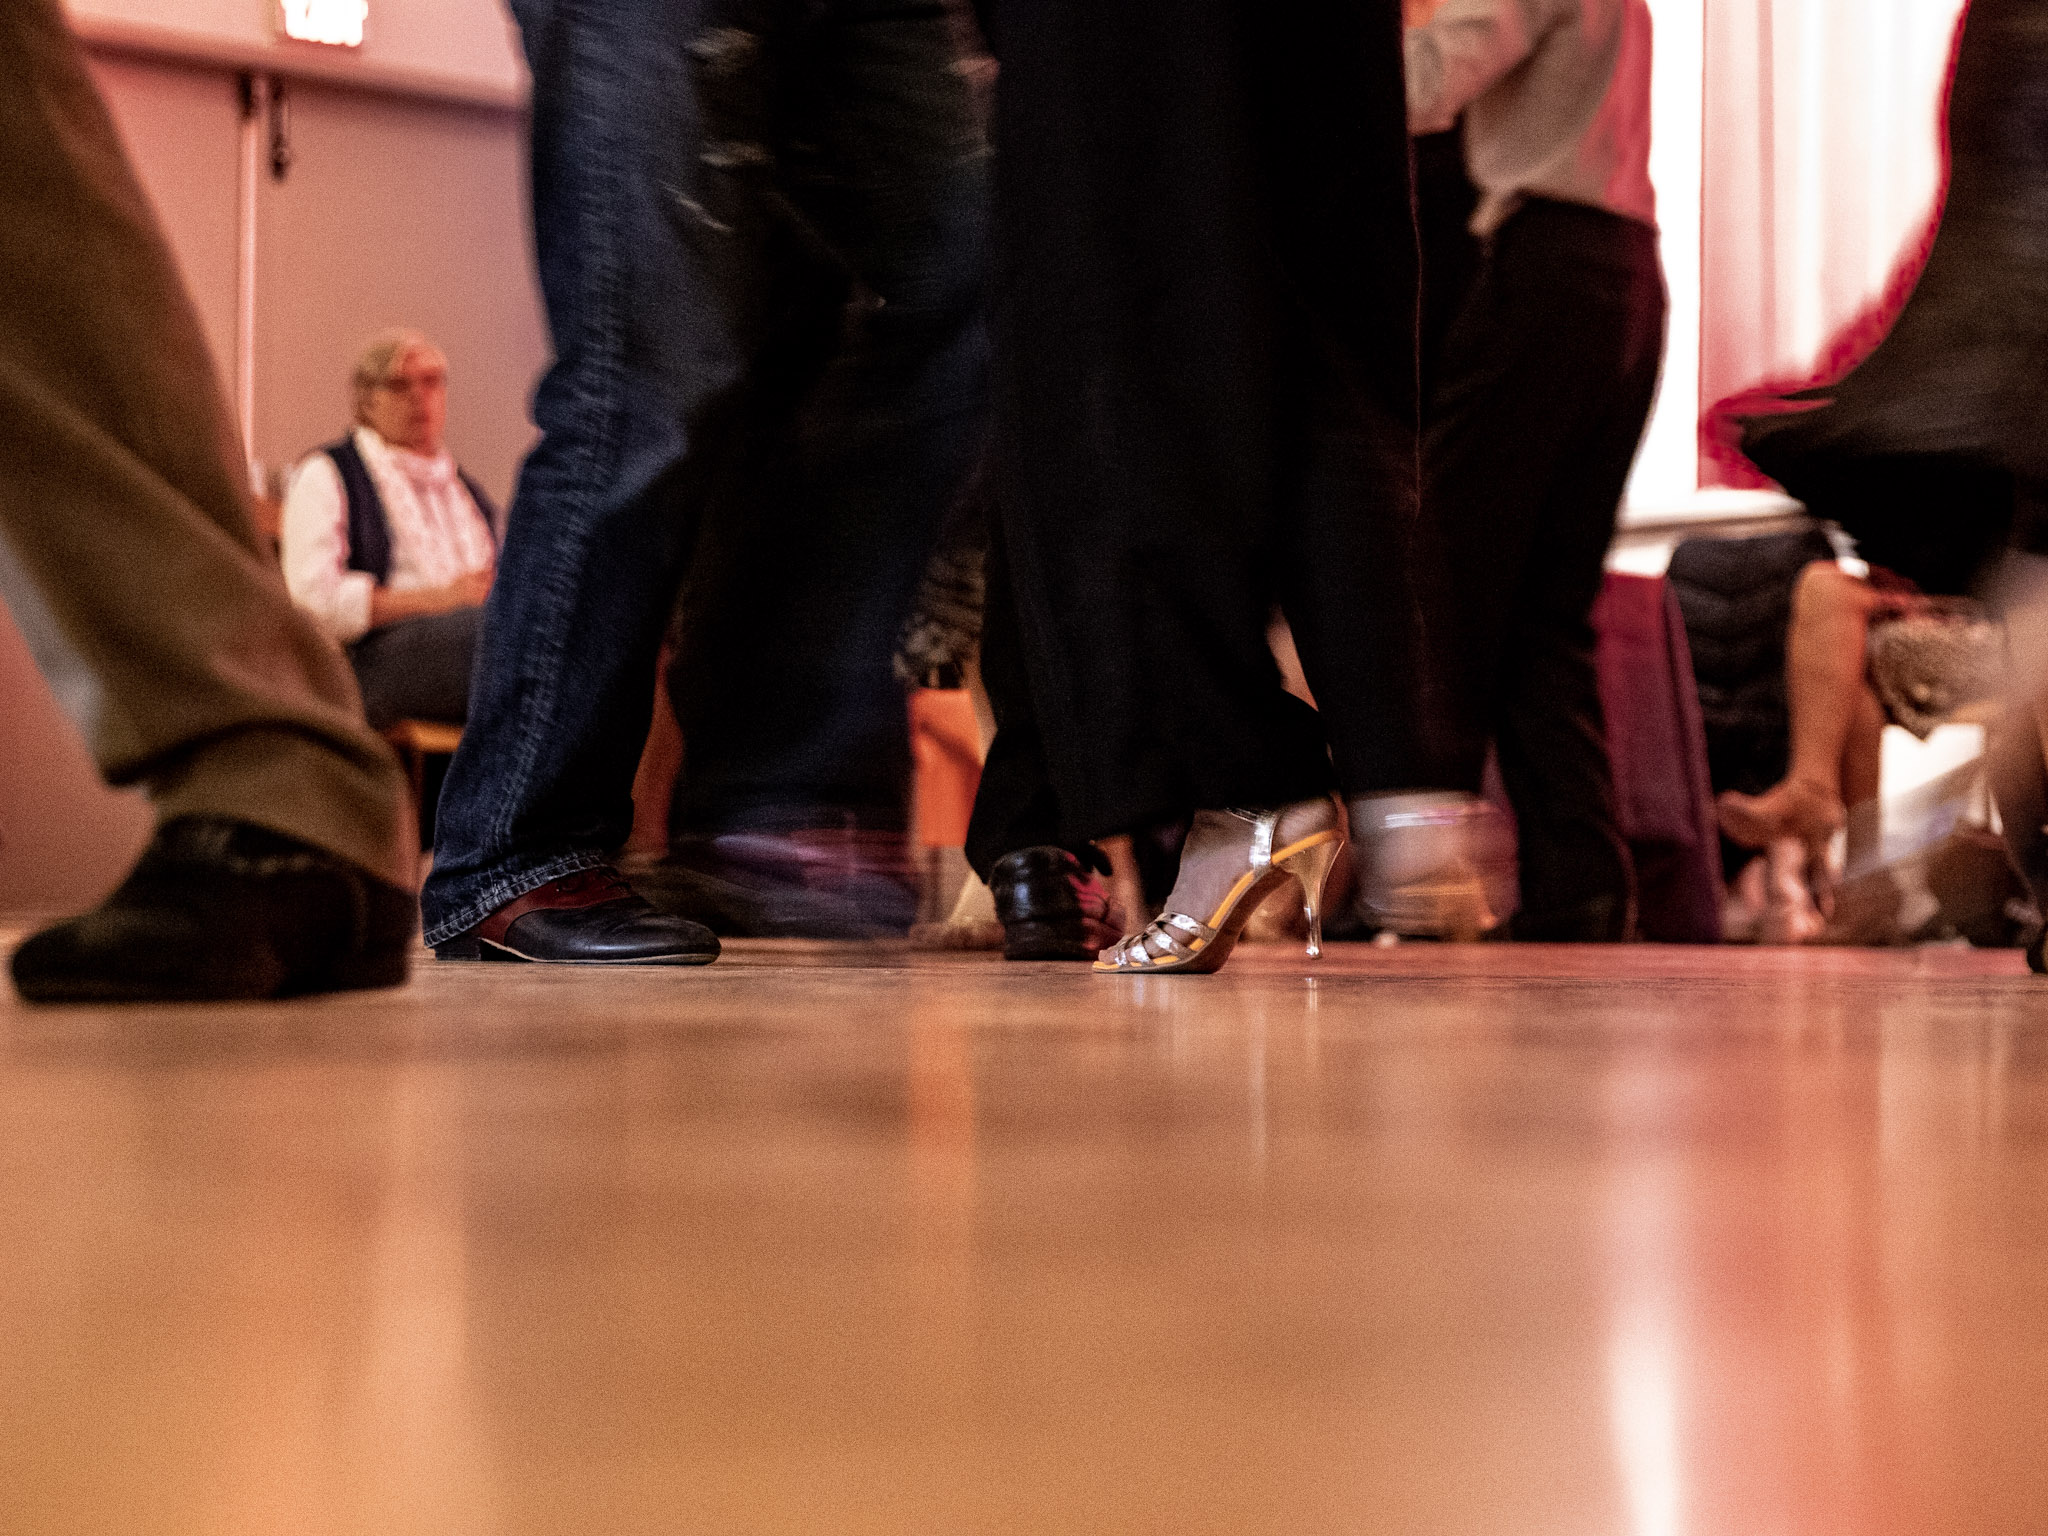 A photograph capturing the movement of those on the dance floor. Two feet are motionless while the out-of-focus whirl of moving legs, feet and bodies surrounds them. 